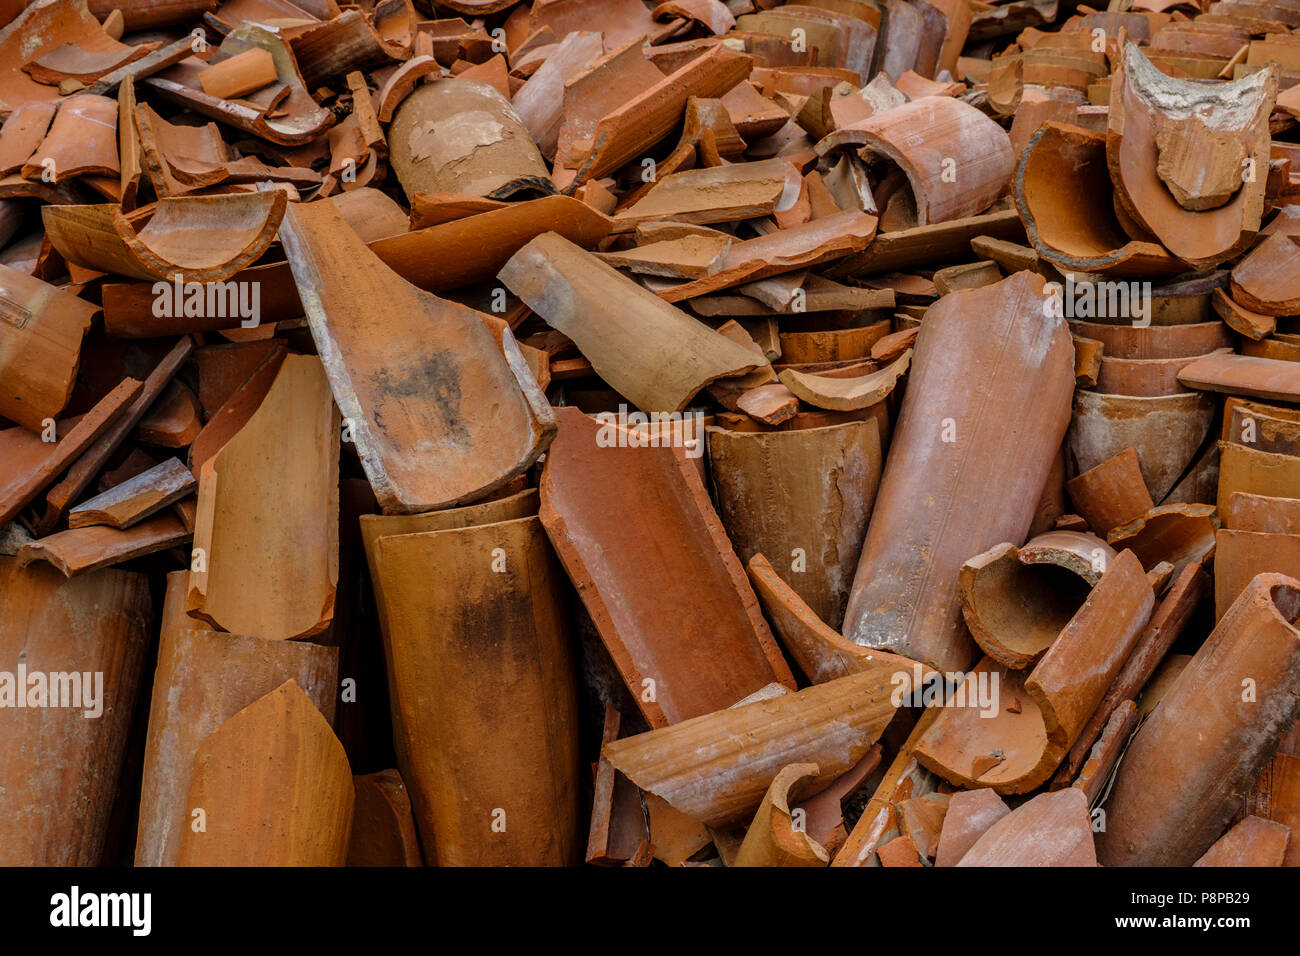 Pile of broken terracotta clay pipes provide interesting textured background Stock Photo